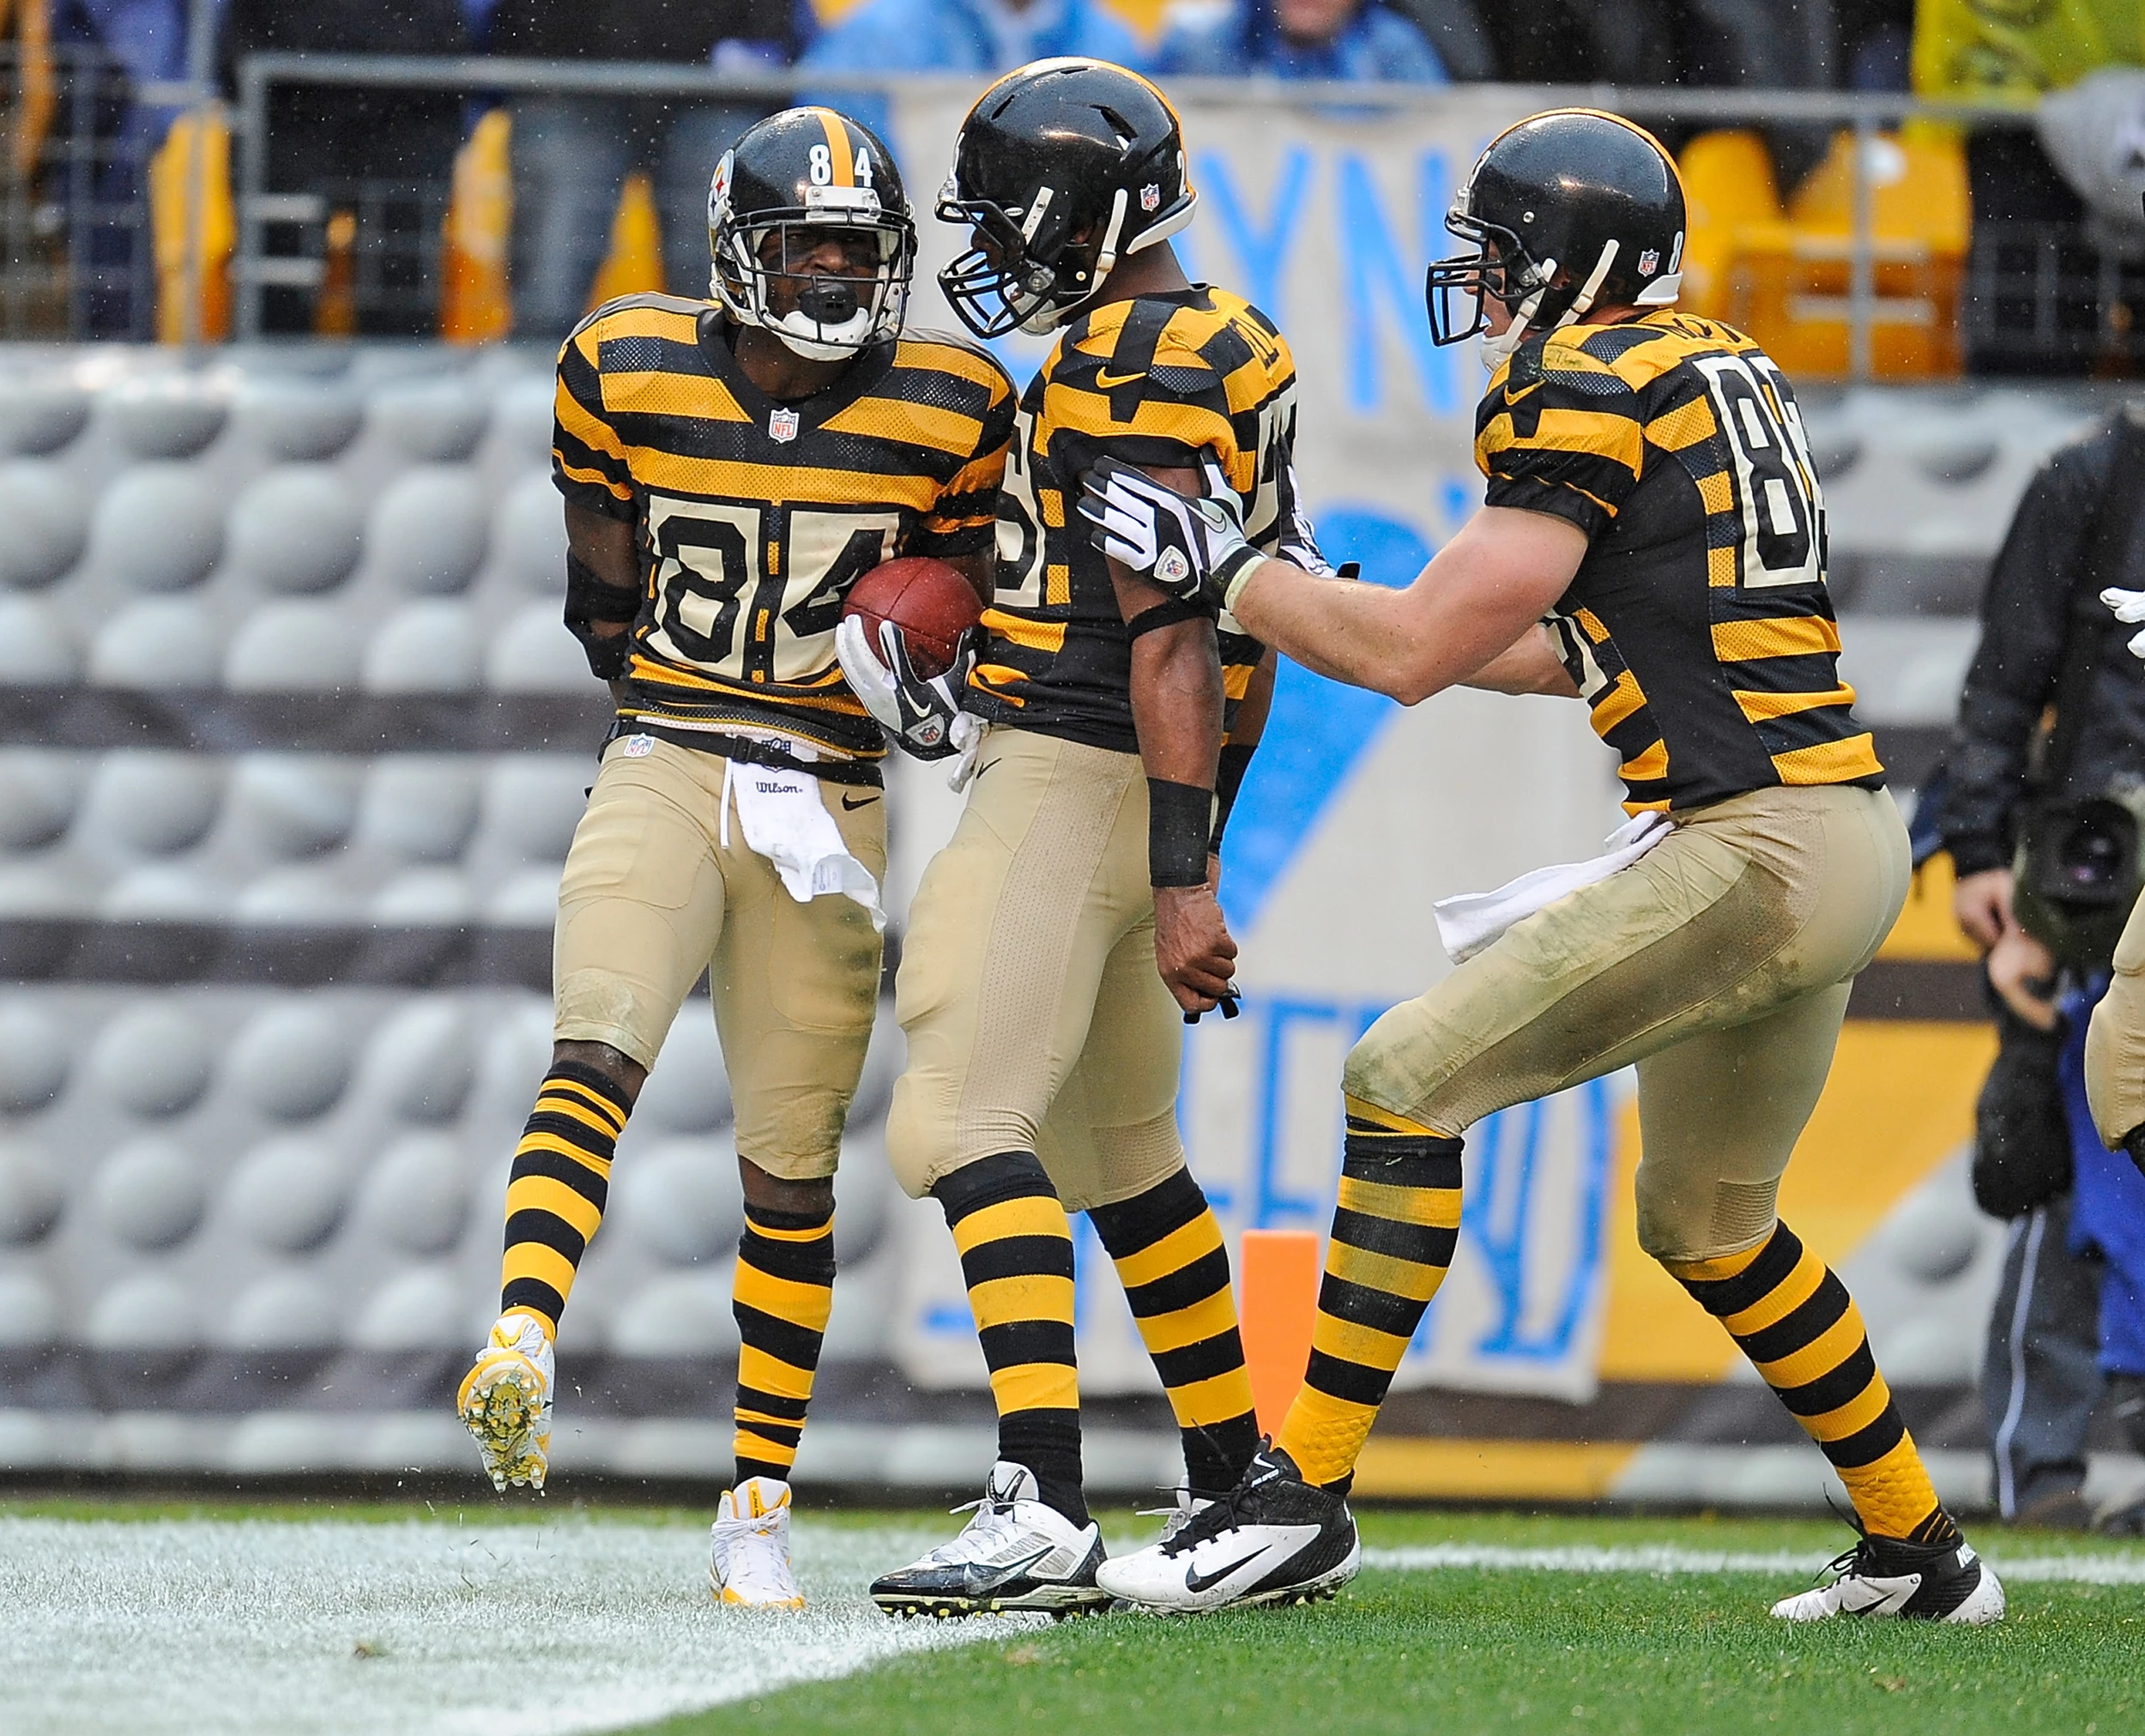 Steelers Thowback Uniforms Look Like Bumble Bees in JAIL